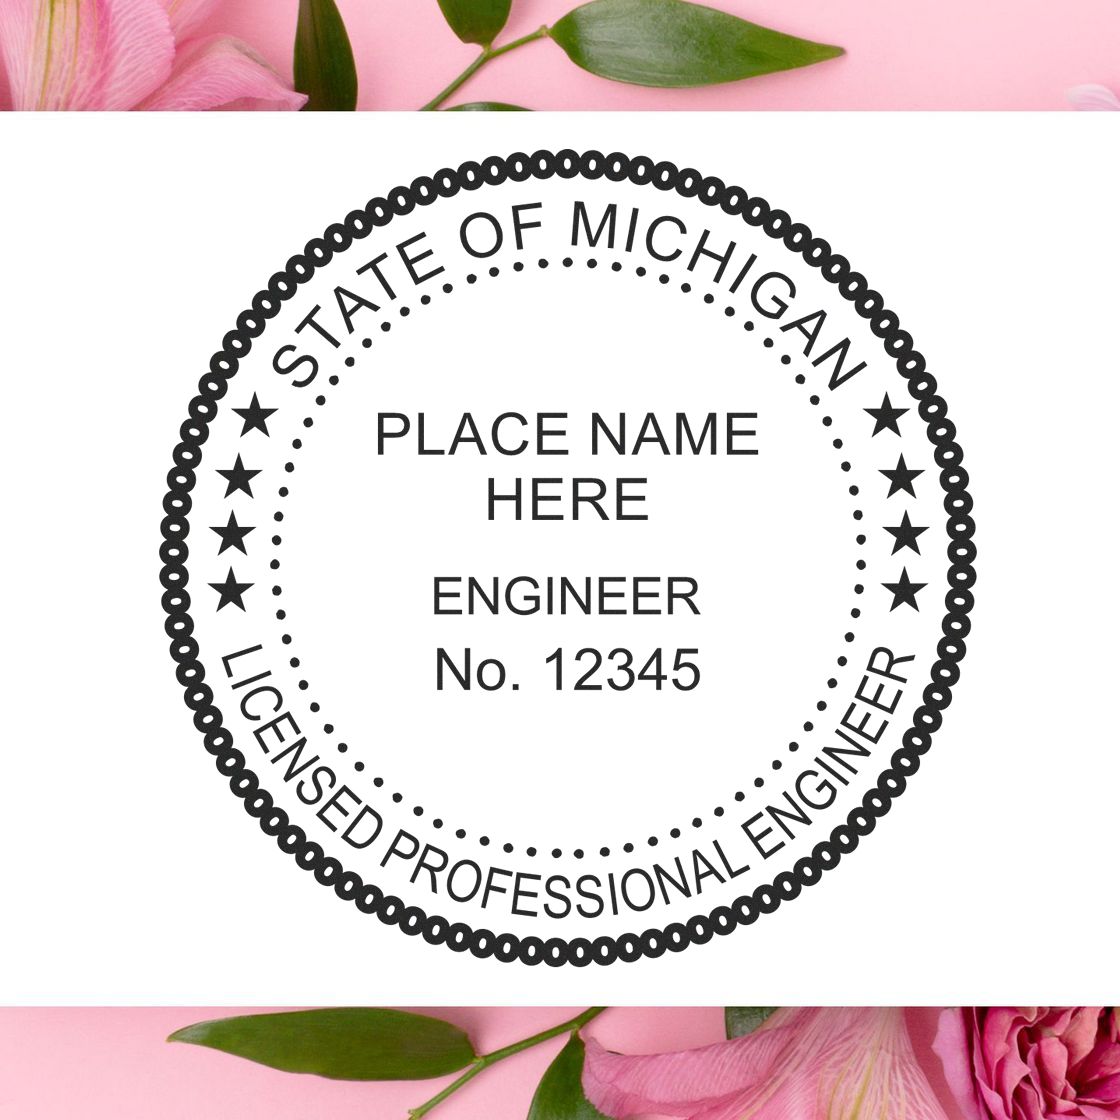 The main image for the Digital Michigan PE Stamp and Electronic Seal for Michigan Engineer depicting a sample of the imprint and electronic files